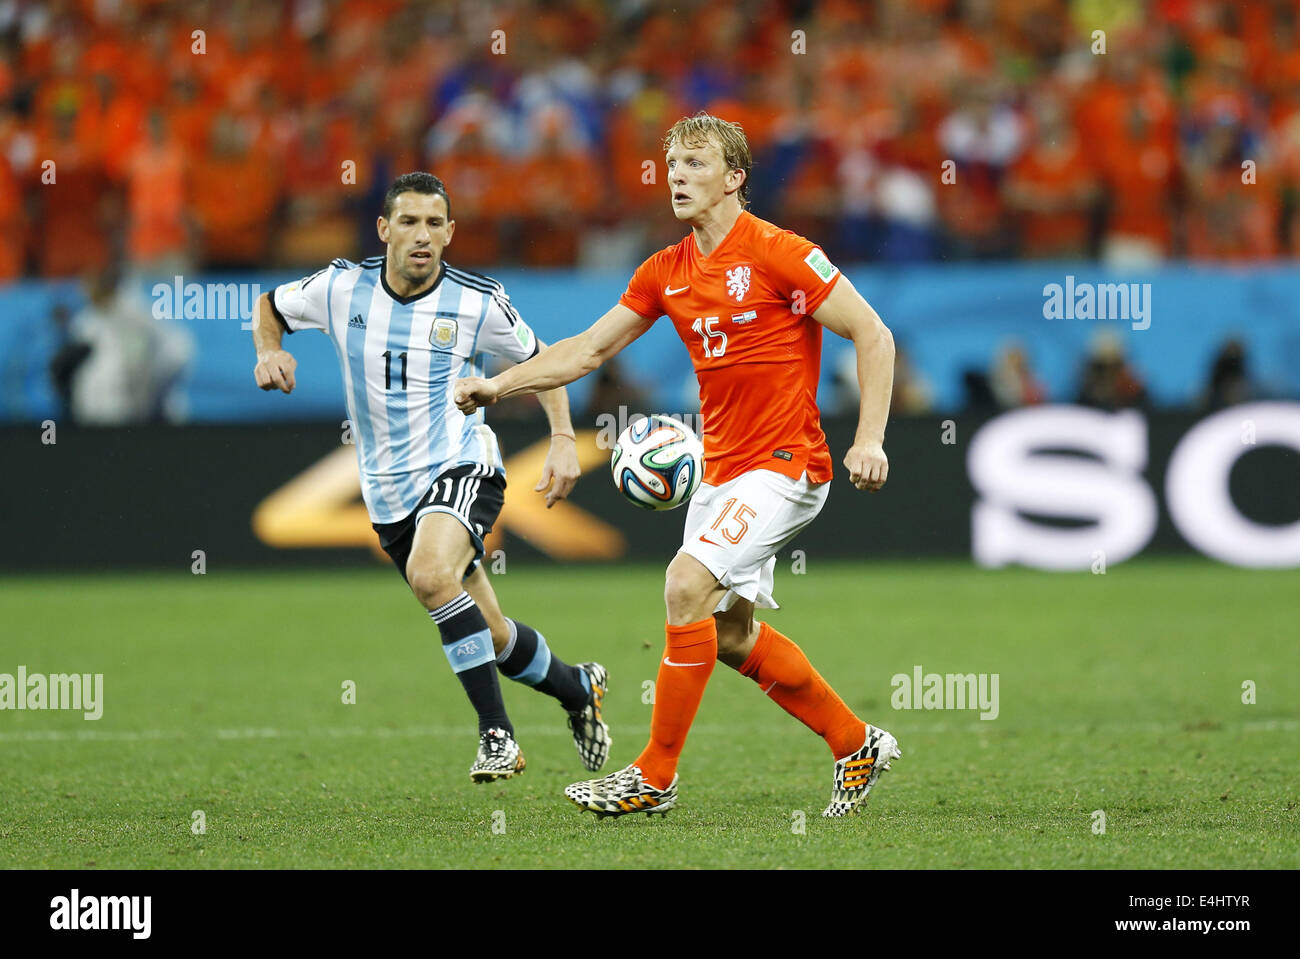 Maxi Rodriguez (ARG), Drik Kuyt (NED), JULY 9, 2014 - Football / Soccer : FIFA World Cup 2014 semi-final match between Netherlands 0(2-4)0 Argentina at Arena De Sao Paulo Stadium in Sao Paulo, Brazil. (Photo by AFLO) [3604] Stock Photo